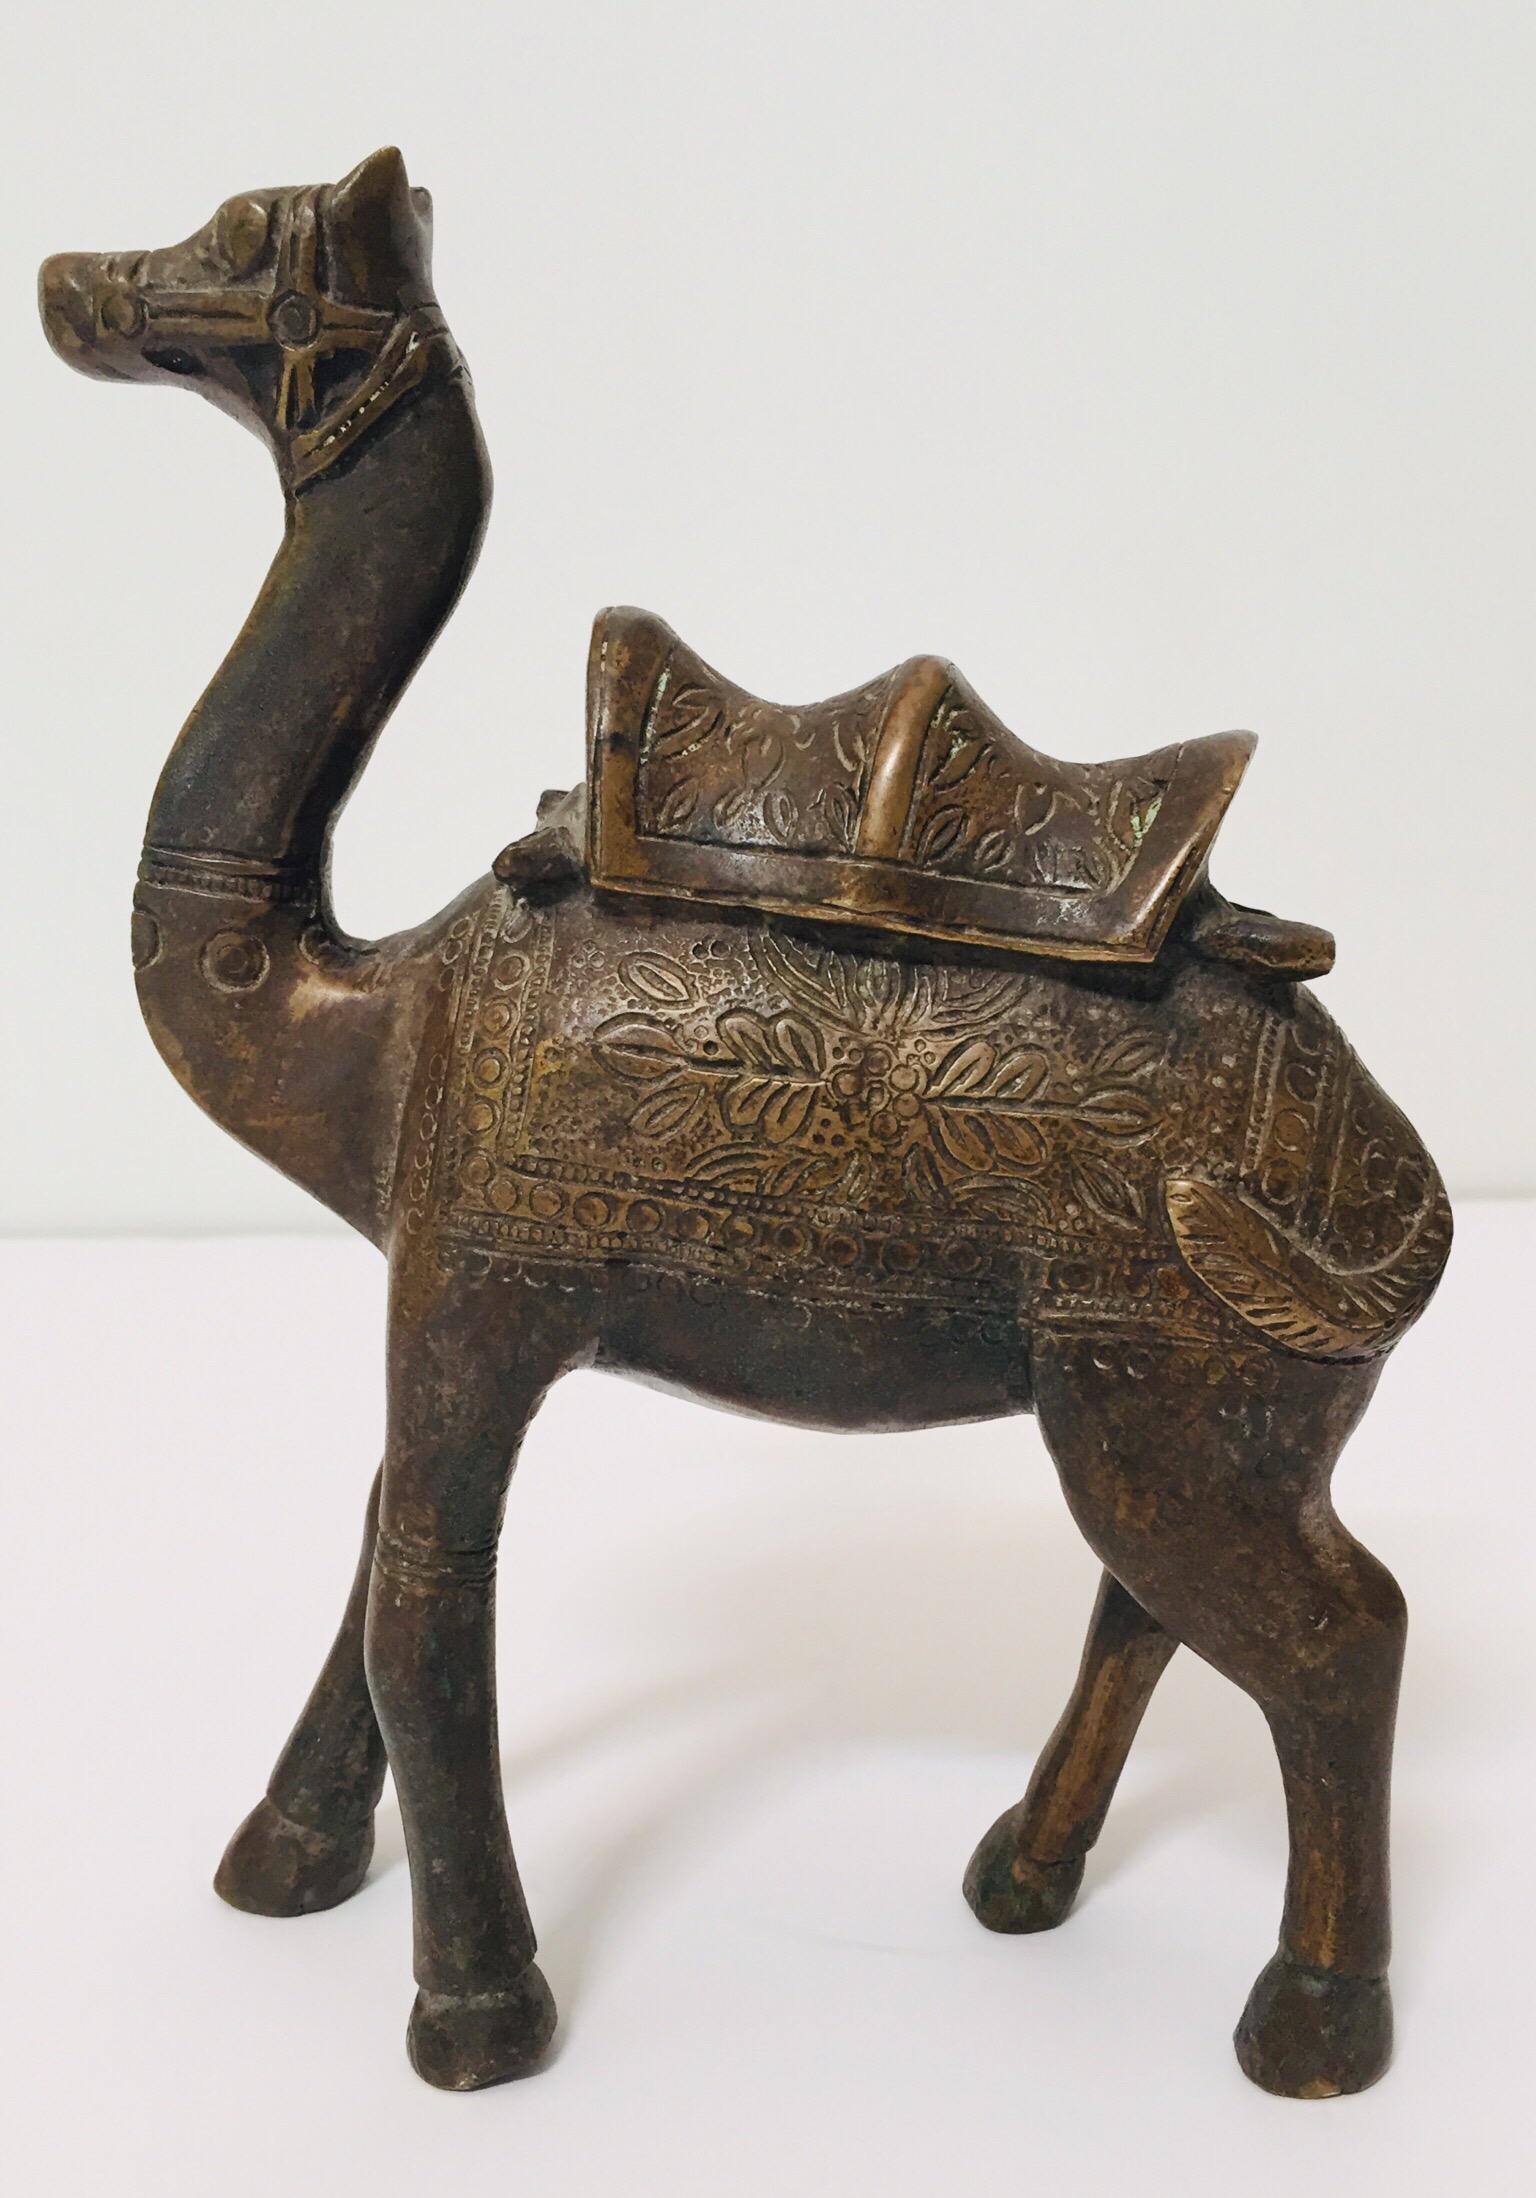 Vintage figure of a standing camel metal brass.
Cast metal brass camel figure in walking position with its head facing forwards. 
Copper bronzed color like patina finish, well carved.
 